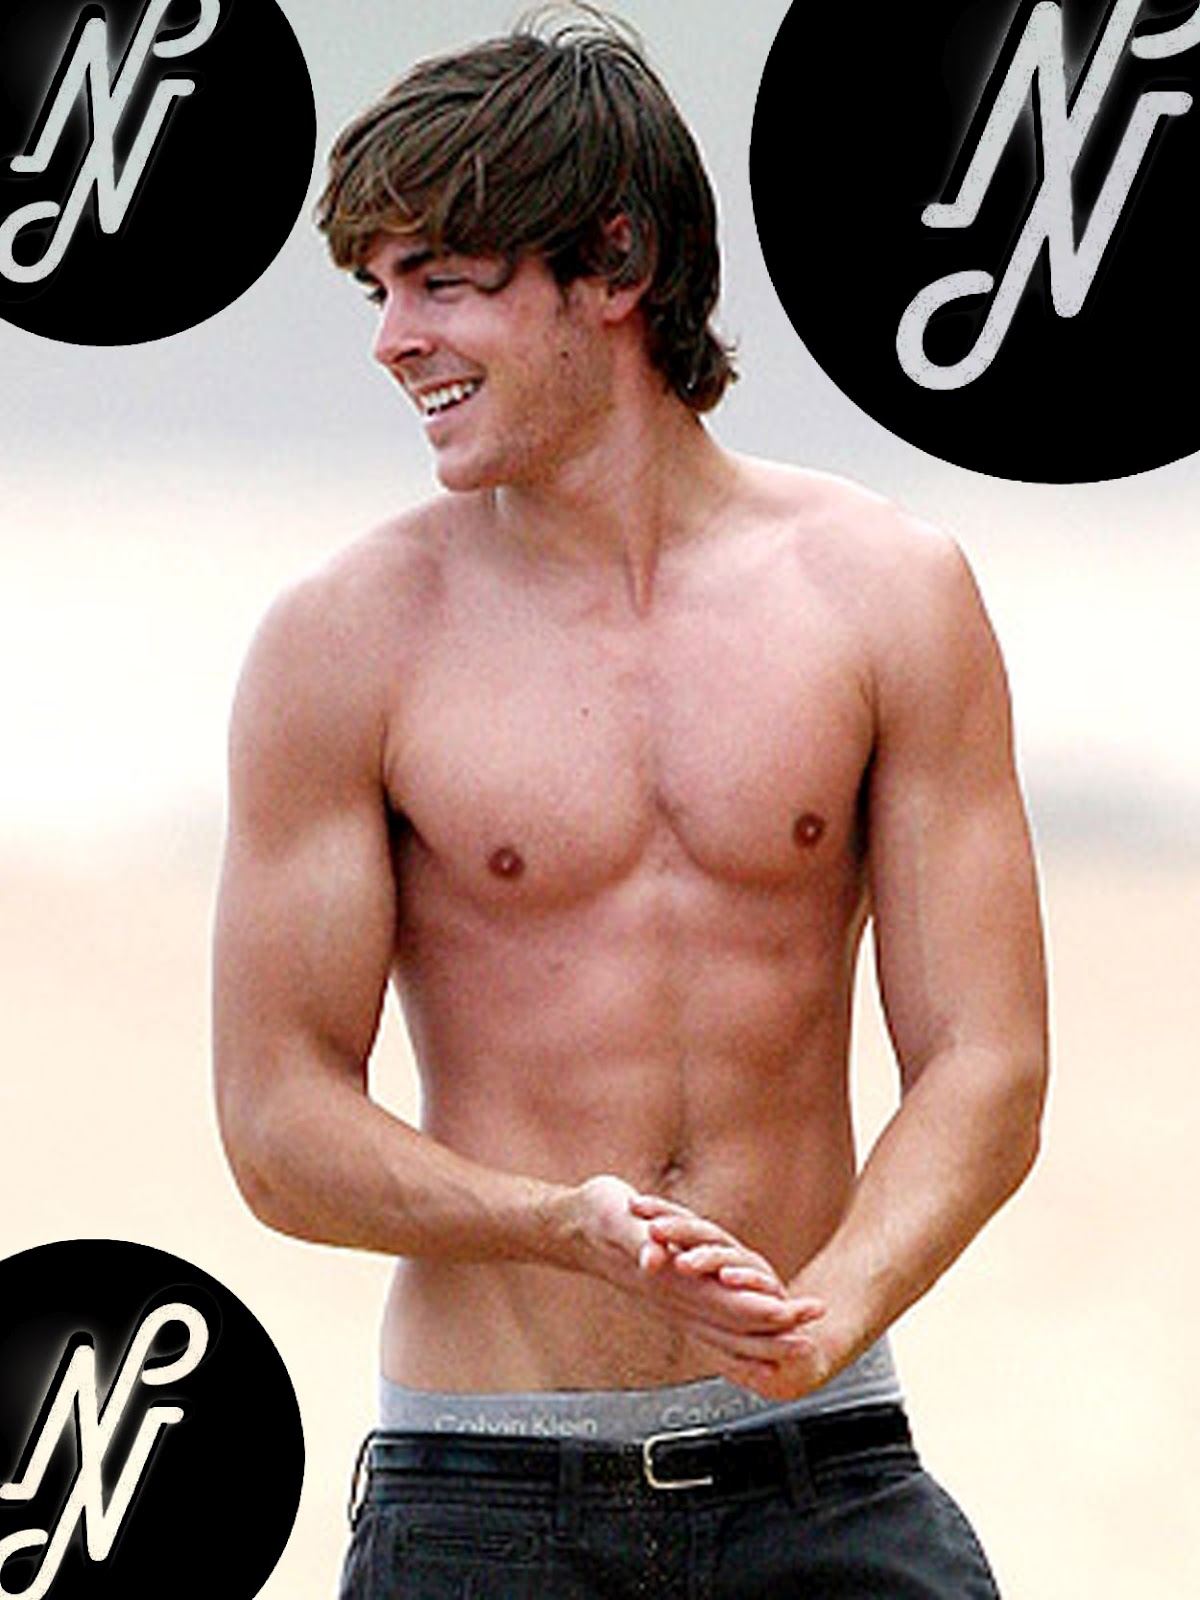 THE.NX.SITE: ZAC EFRON (THE SCANDALS & EXPOSED!)